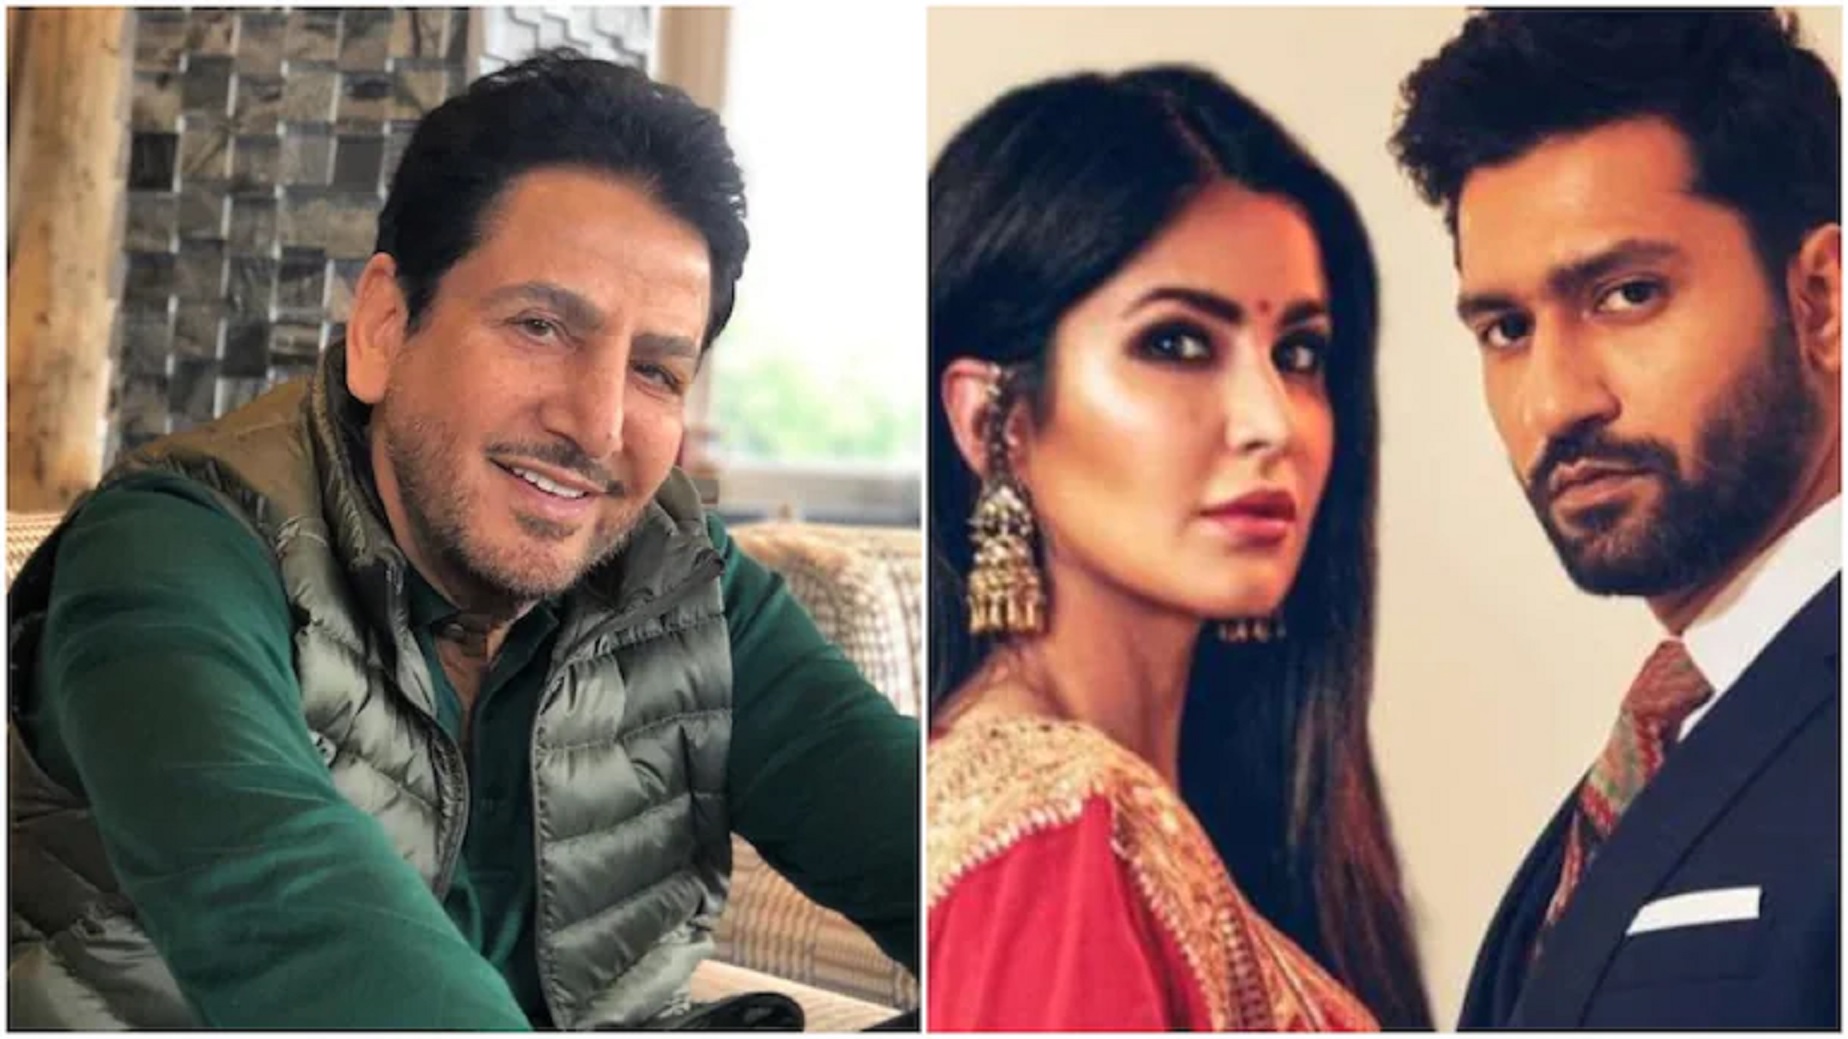 Watch: Gurdas Maan Sings Special Song For Soon To Be Wed – Katrina Kaif & Vicky Kaushal